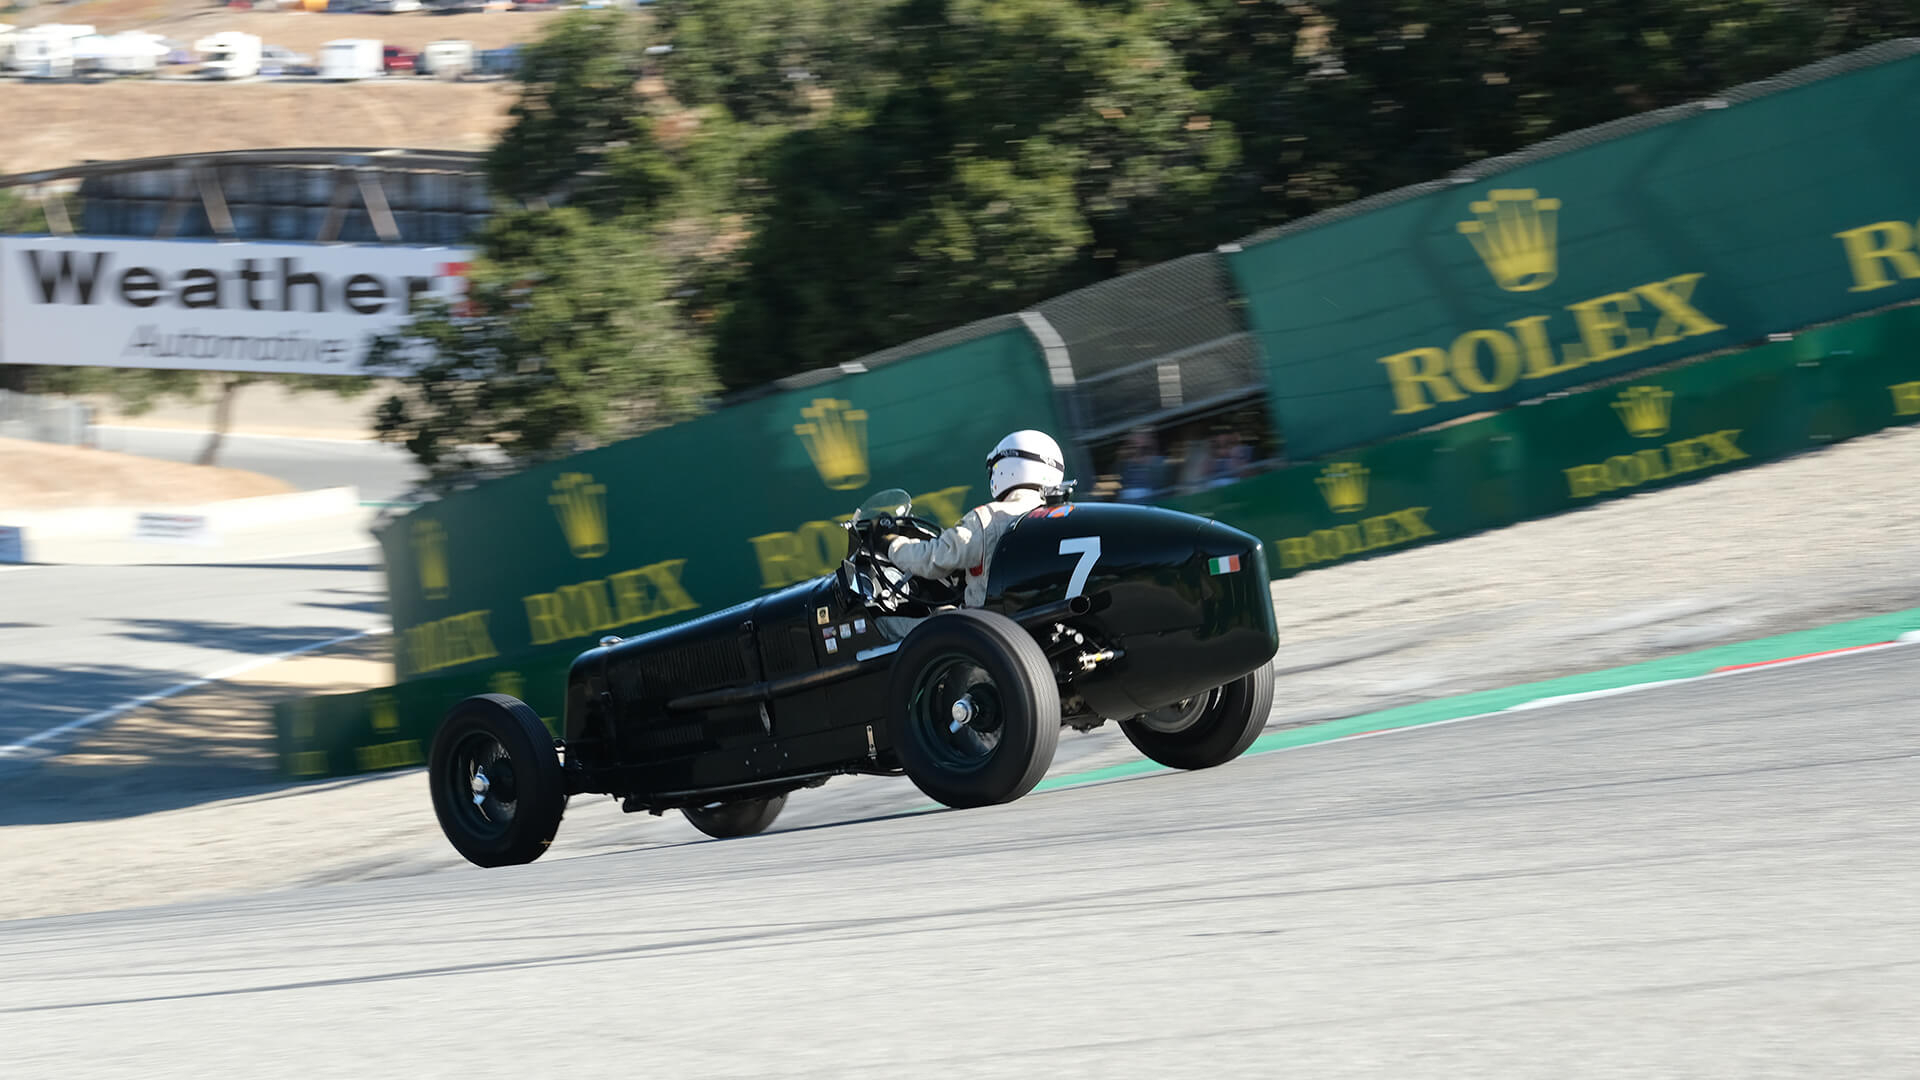 On track at the 2019 Rolex Monterey Motorsports Reunion